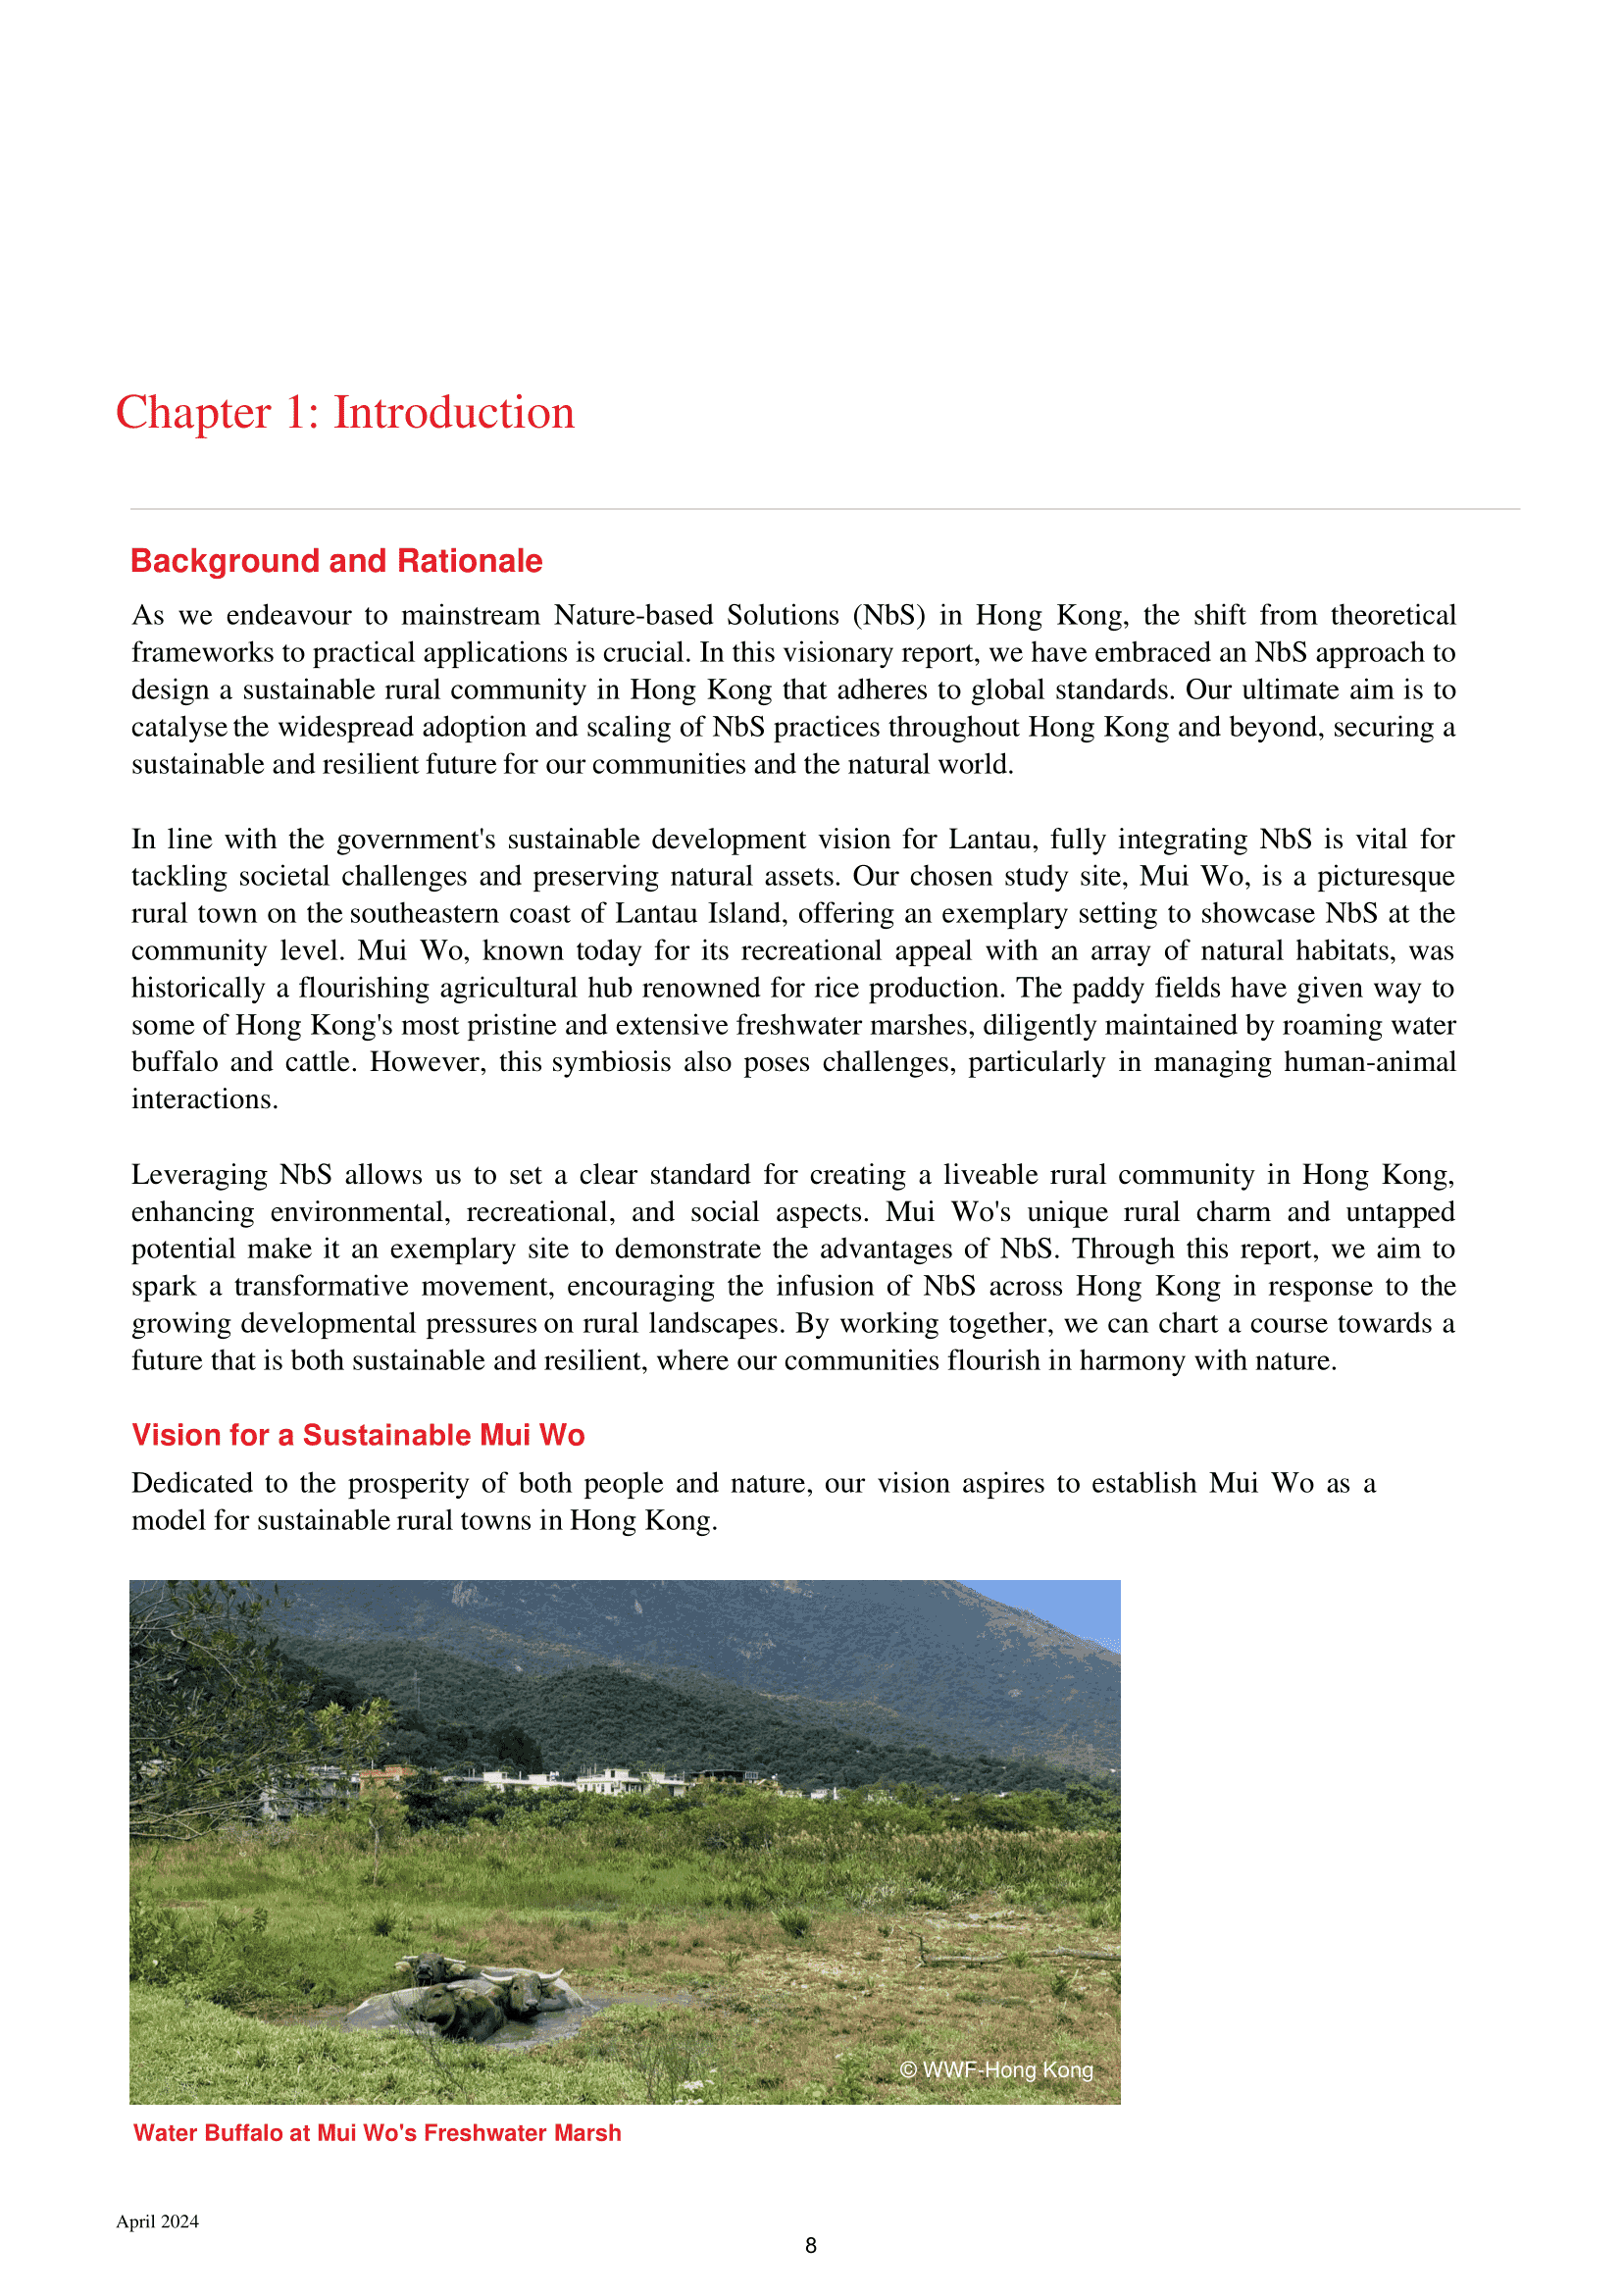 Designing_a_Sustainable_Rural_Township_With_Naturebased_Solutions-09_2_bic.png